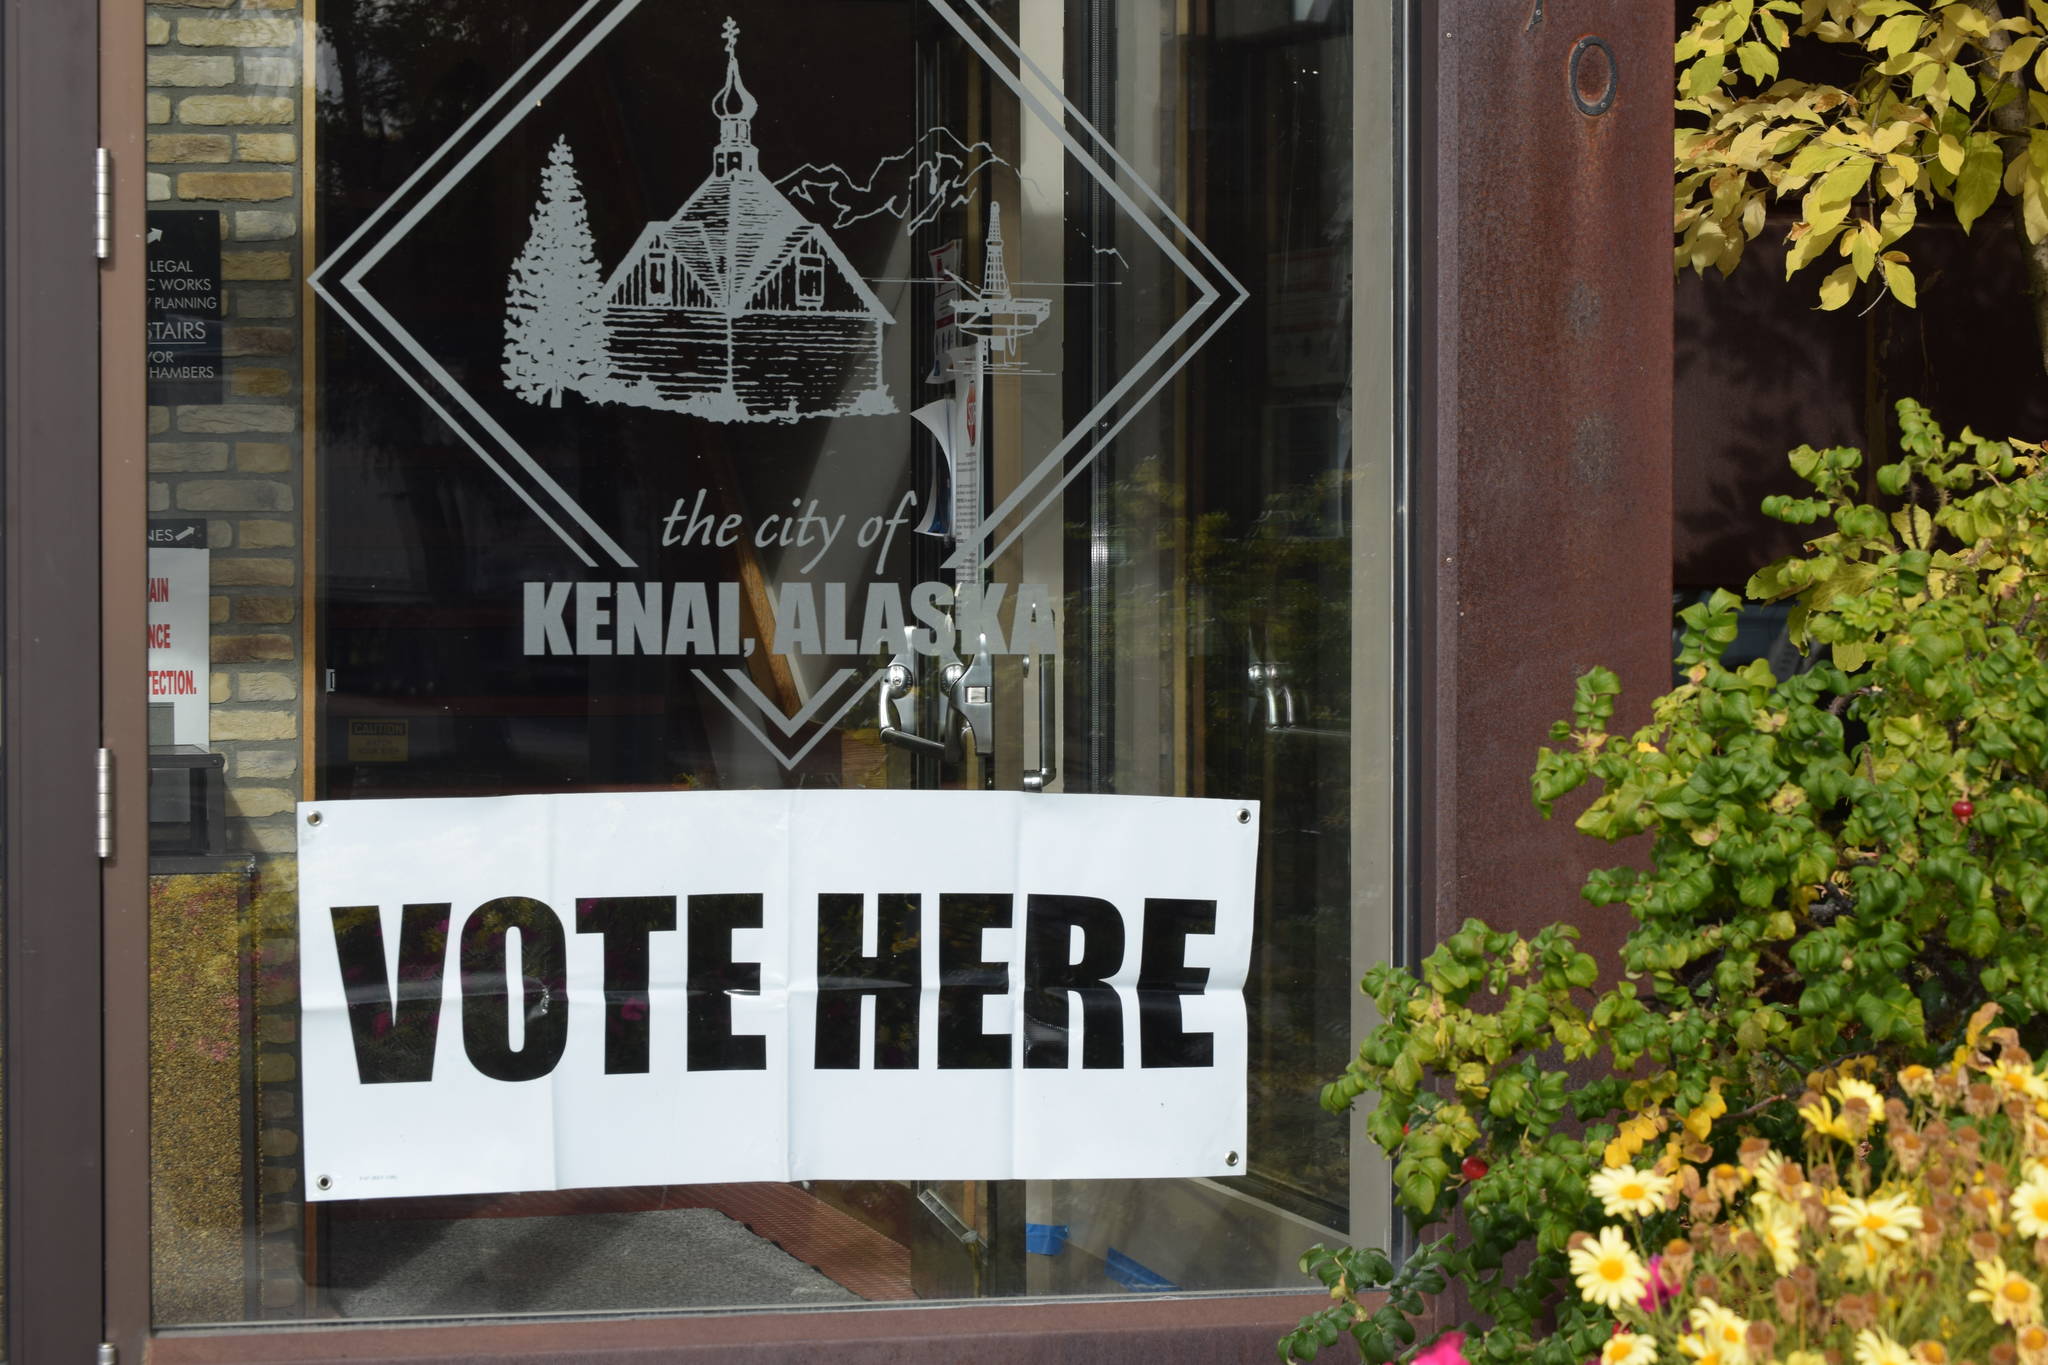 A “Vote Here” sign is seen at the City of Kenai building on Monday, Sept. 21, 2020, in Kenai, Alaska.